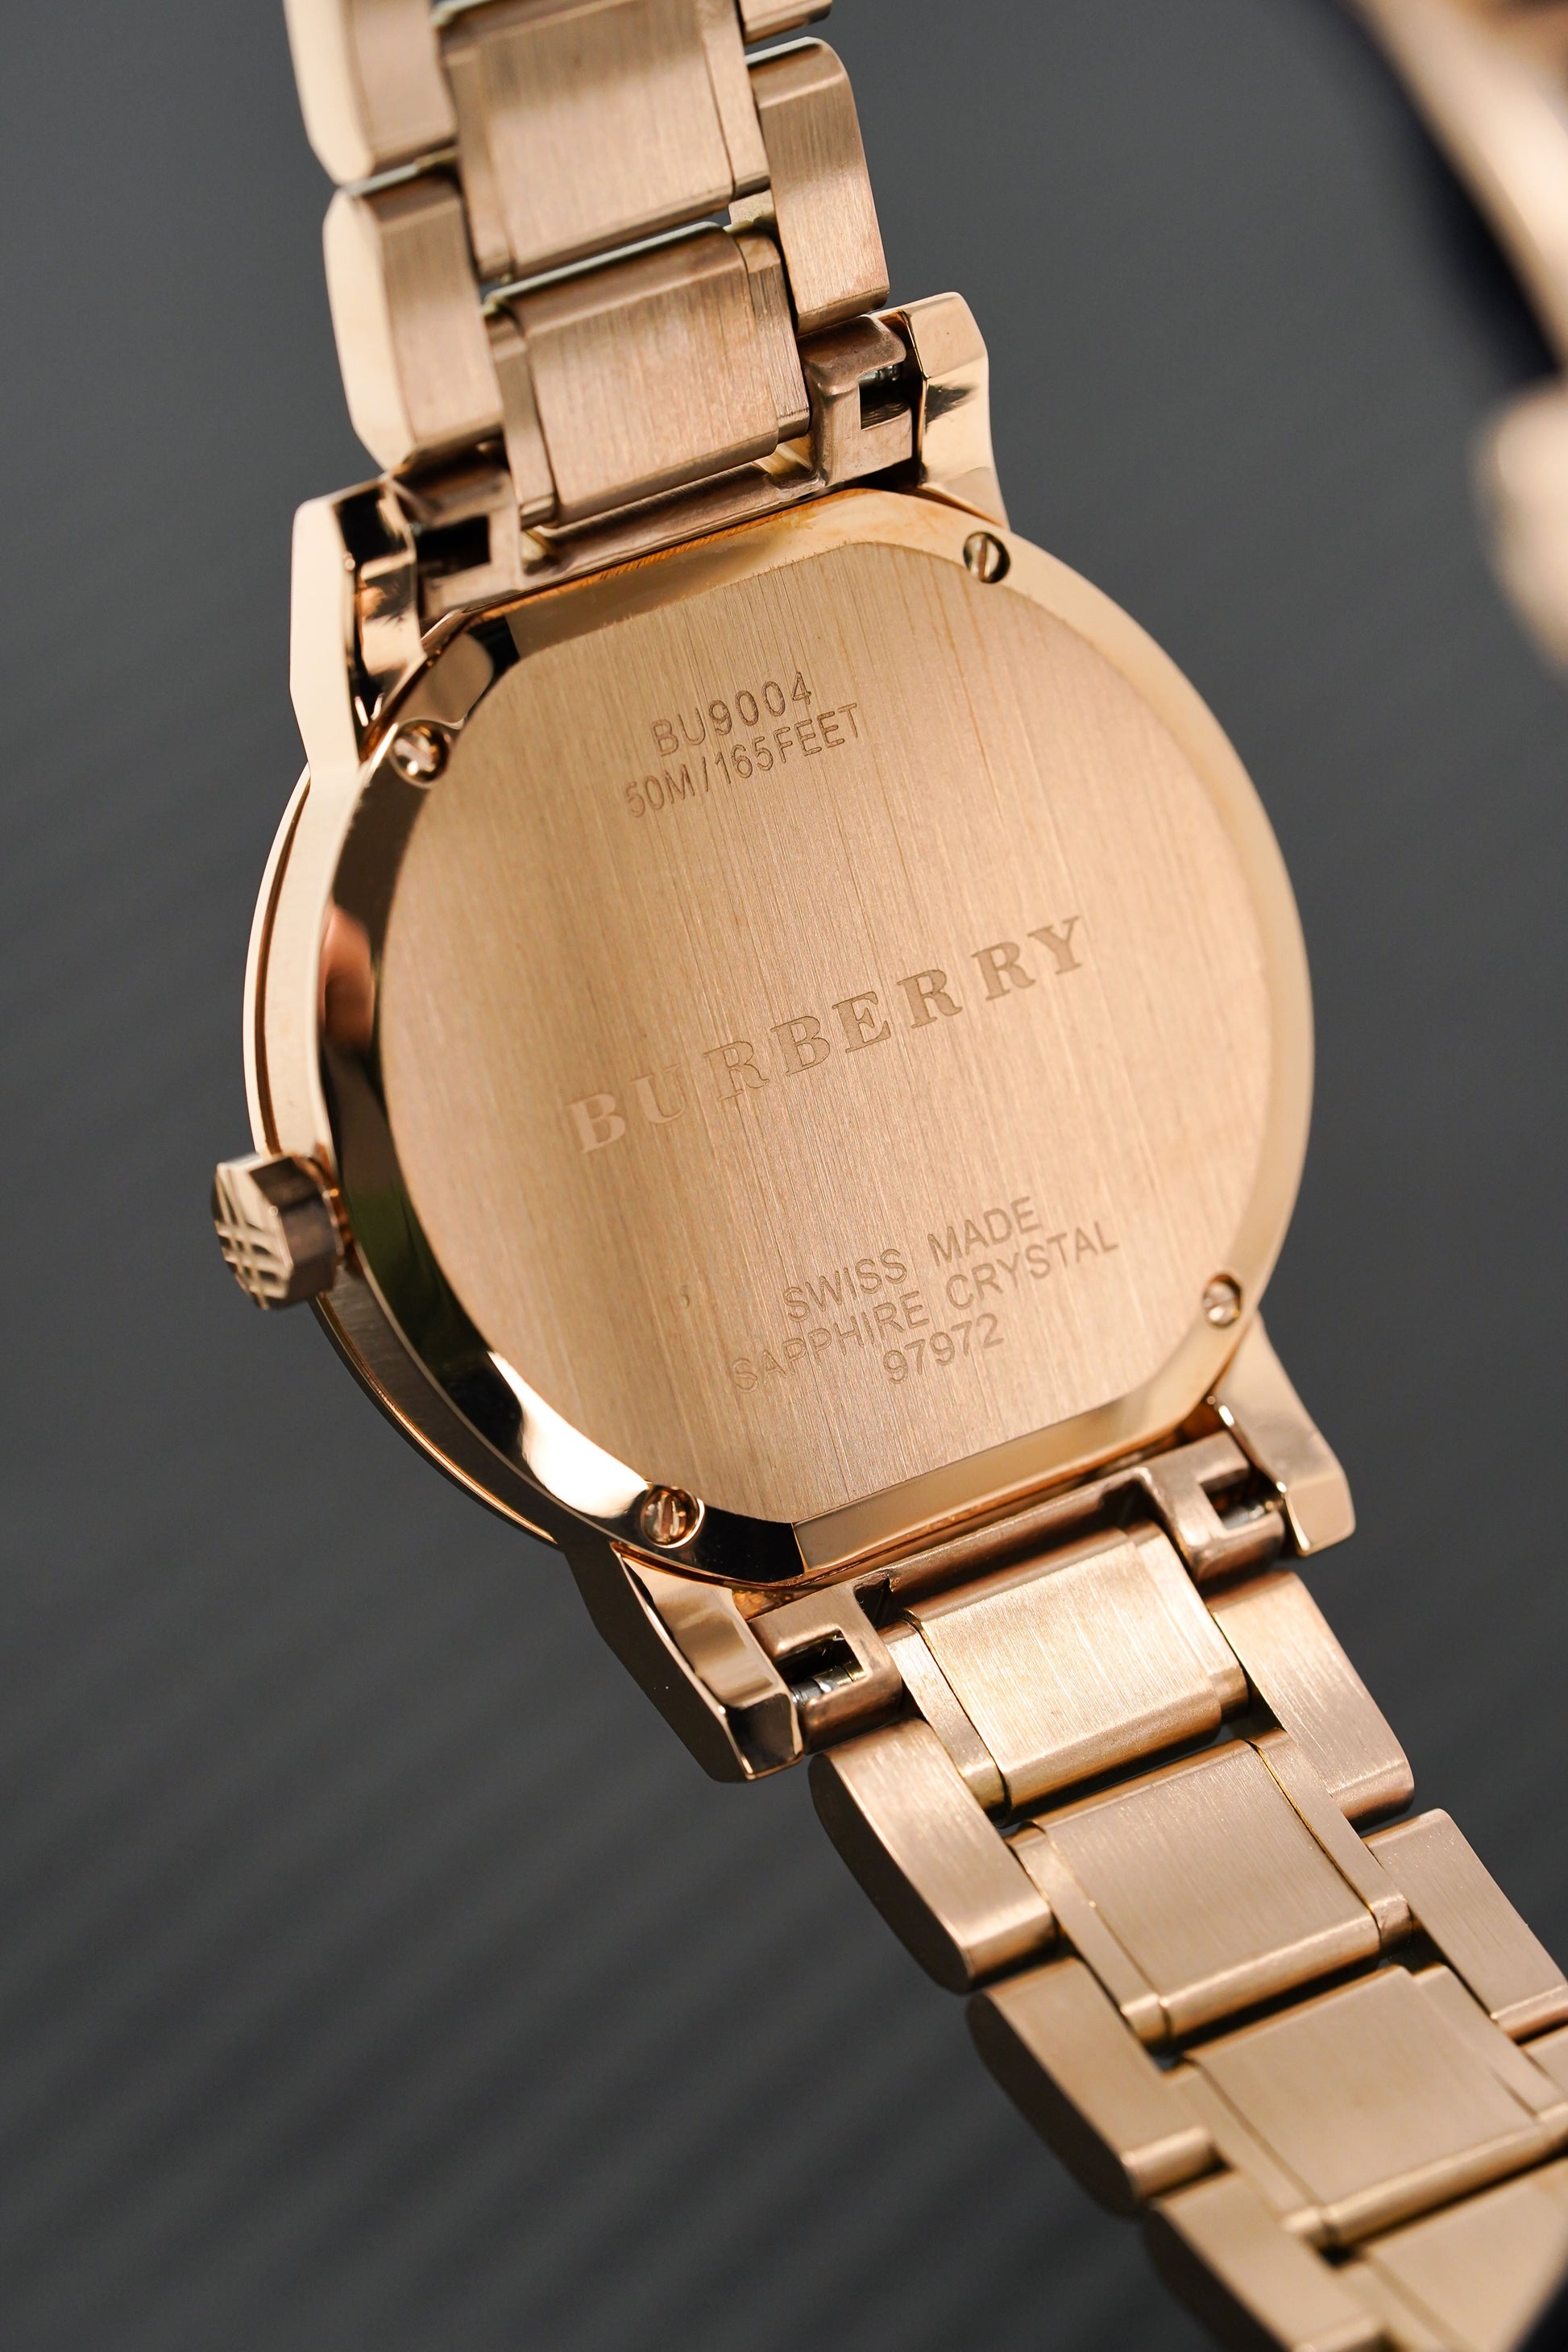 Burberry The City White Dial Rose Gold Steel Strap Watch for Women - BU9004